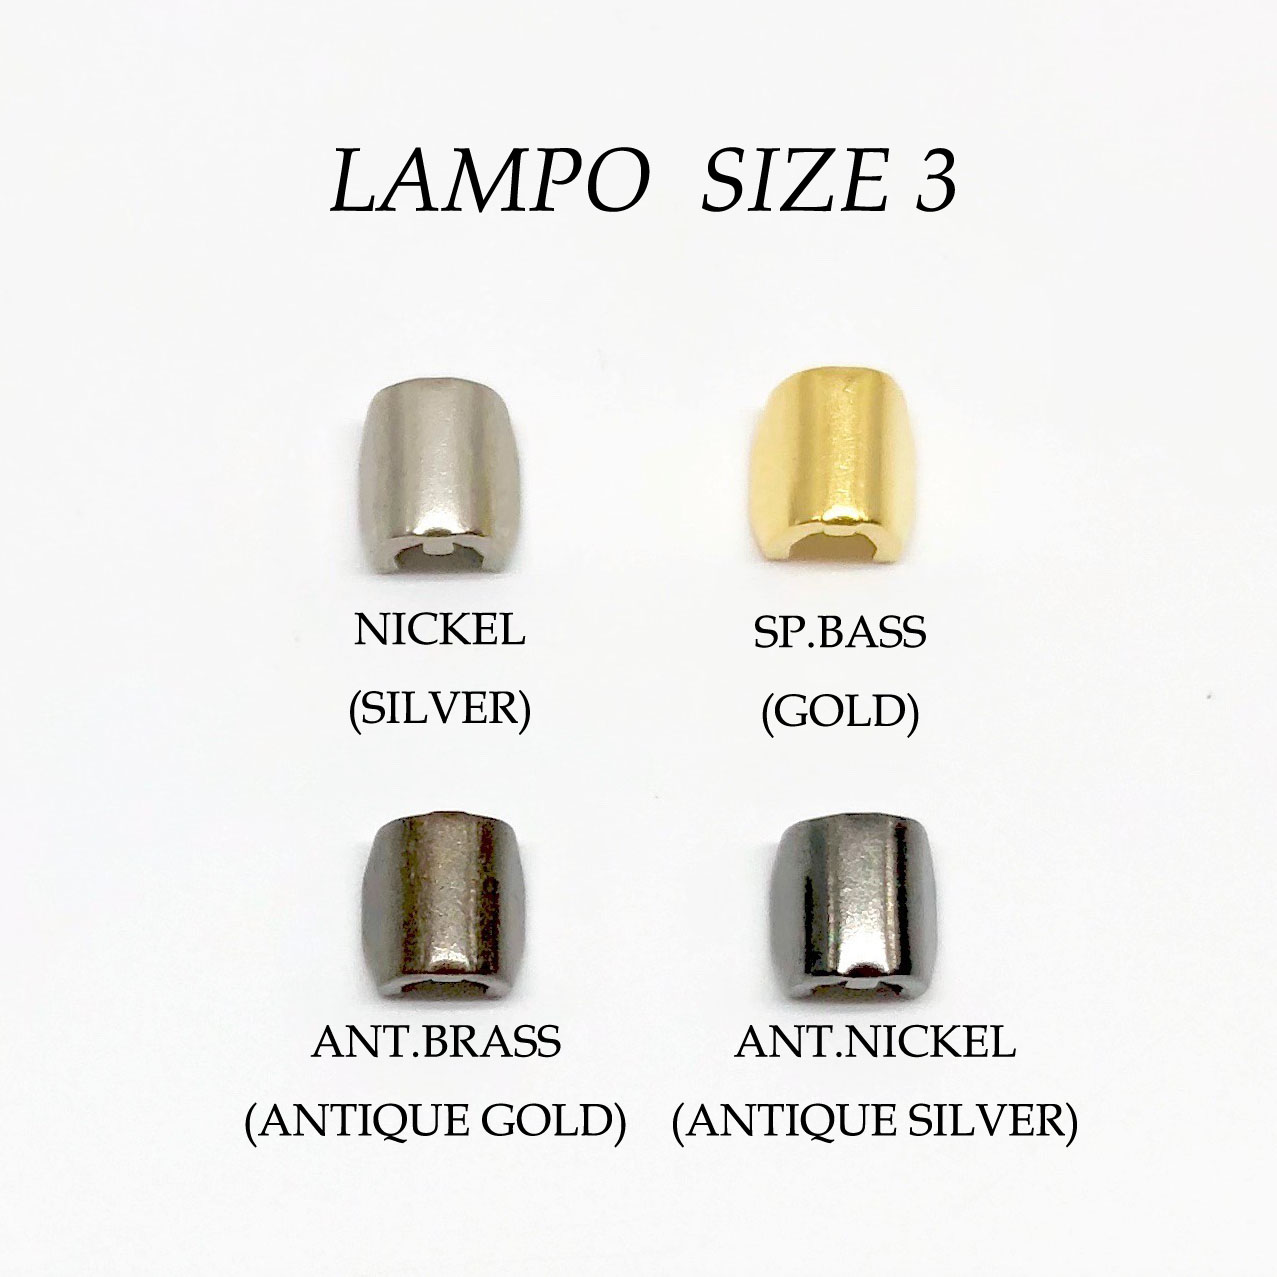 283S Super LAMPO Zipper Top Stop For Size 3 Only LAMPO(GIOVANNI LANFRANCHI SPA)